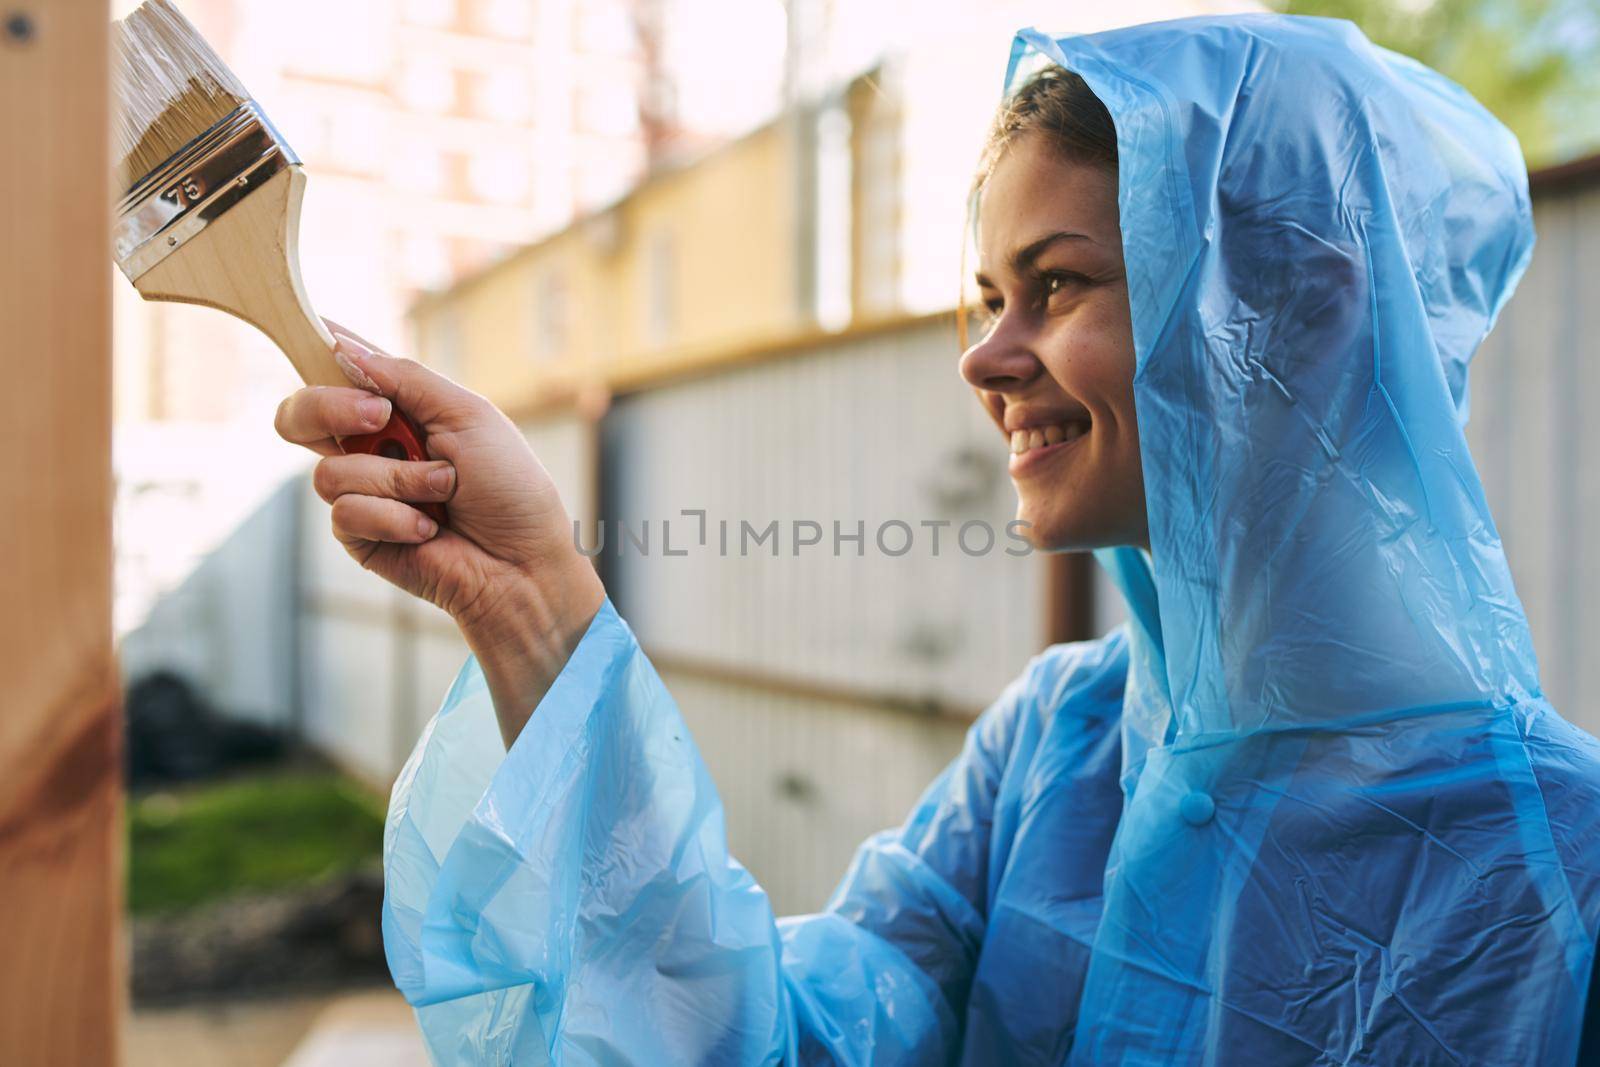 woman in protective suit painter accessories wooden object designer. High quality photo